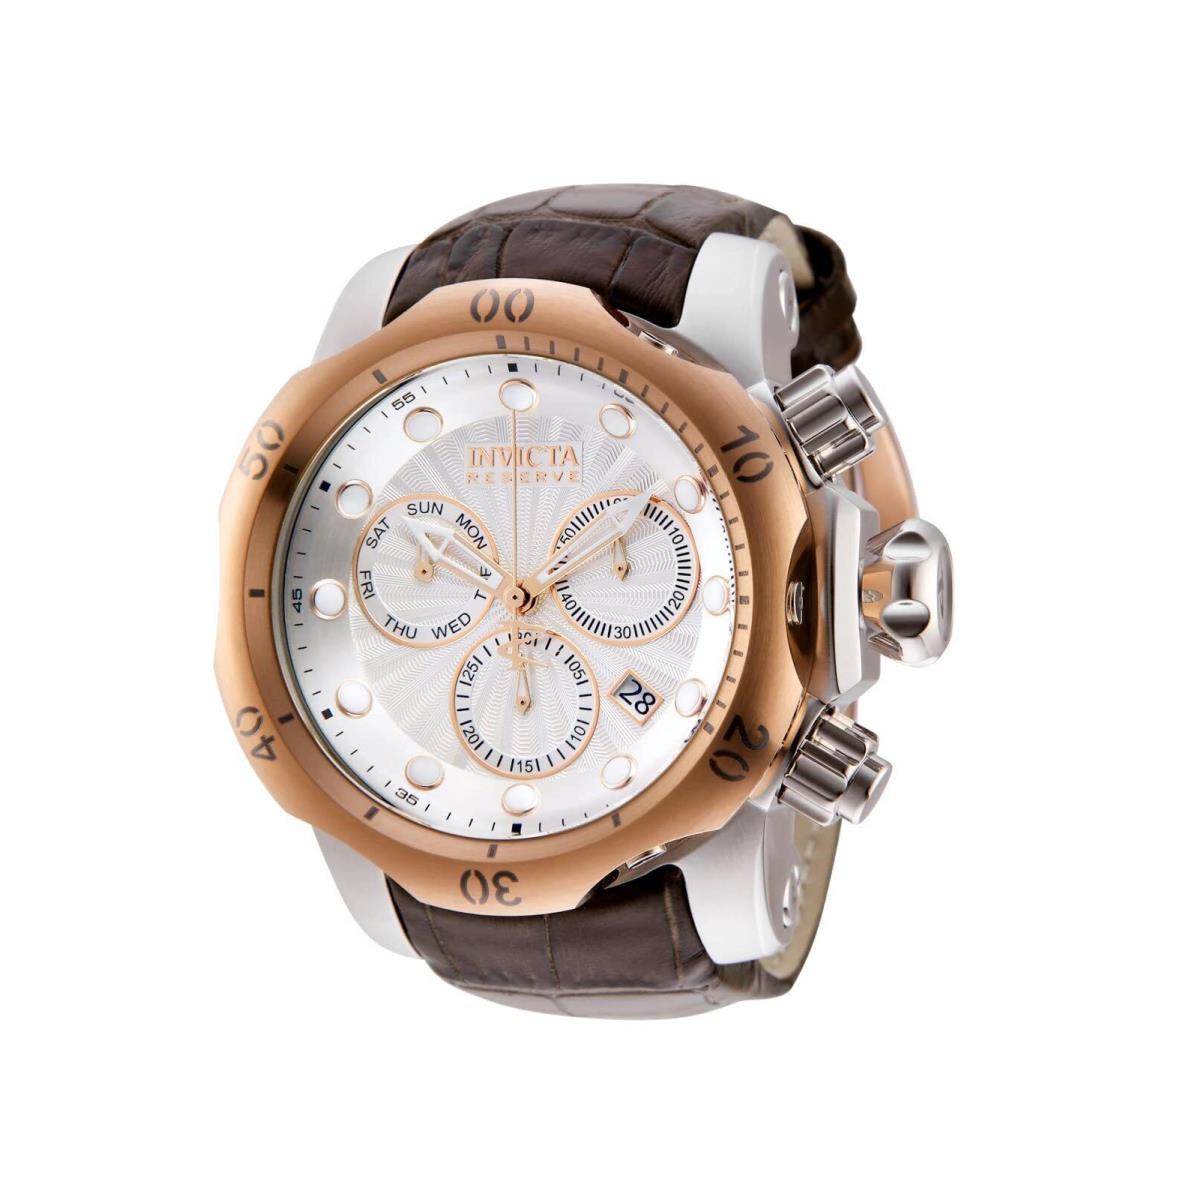 Invicta Men`s 0359 Reserve Collection Venom Chronograph Brown Leather Watch - Dial: White, Band: Brown, Bezel: Rose Gold